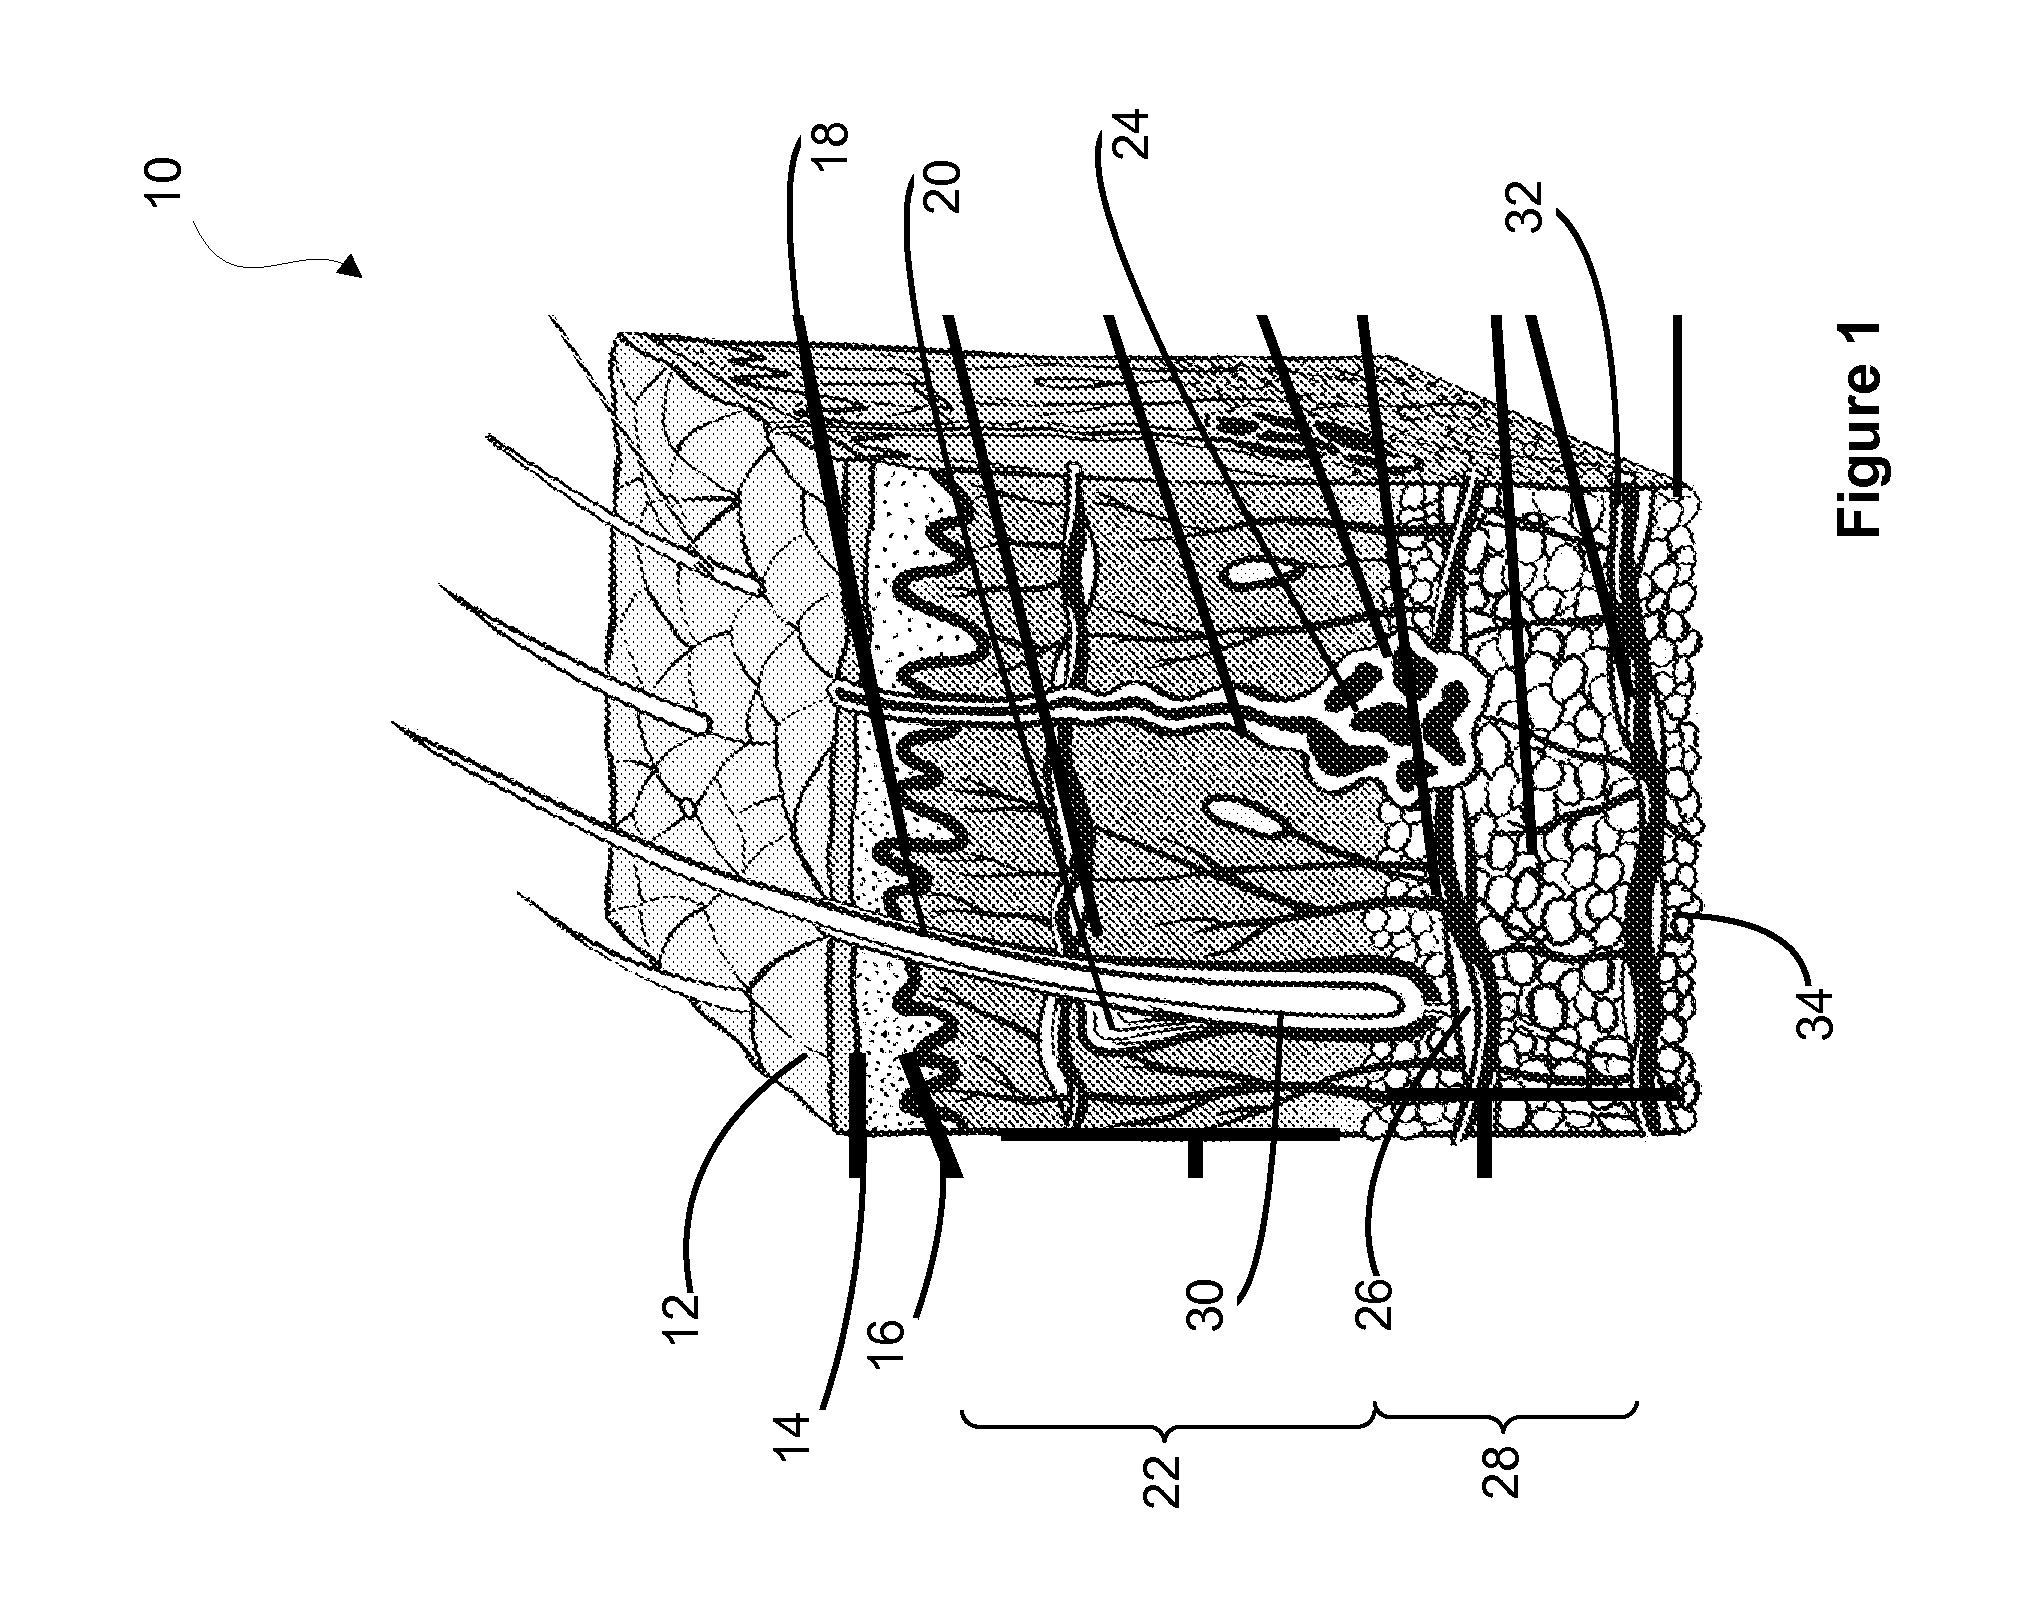 Systems and Methods for Enhancing the Delivery of Compounds to Skin Pores using Ultrasonic Waveforms